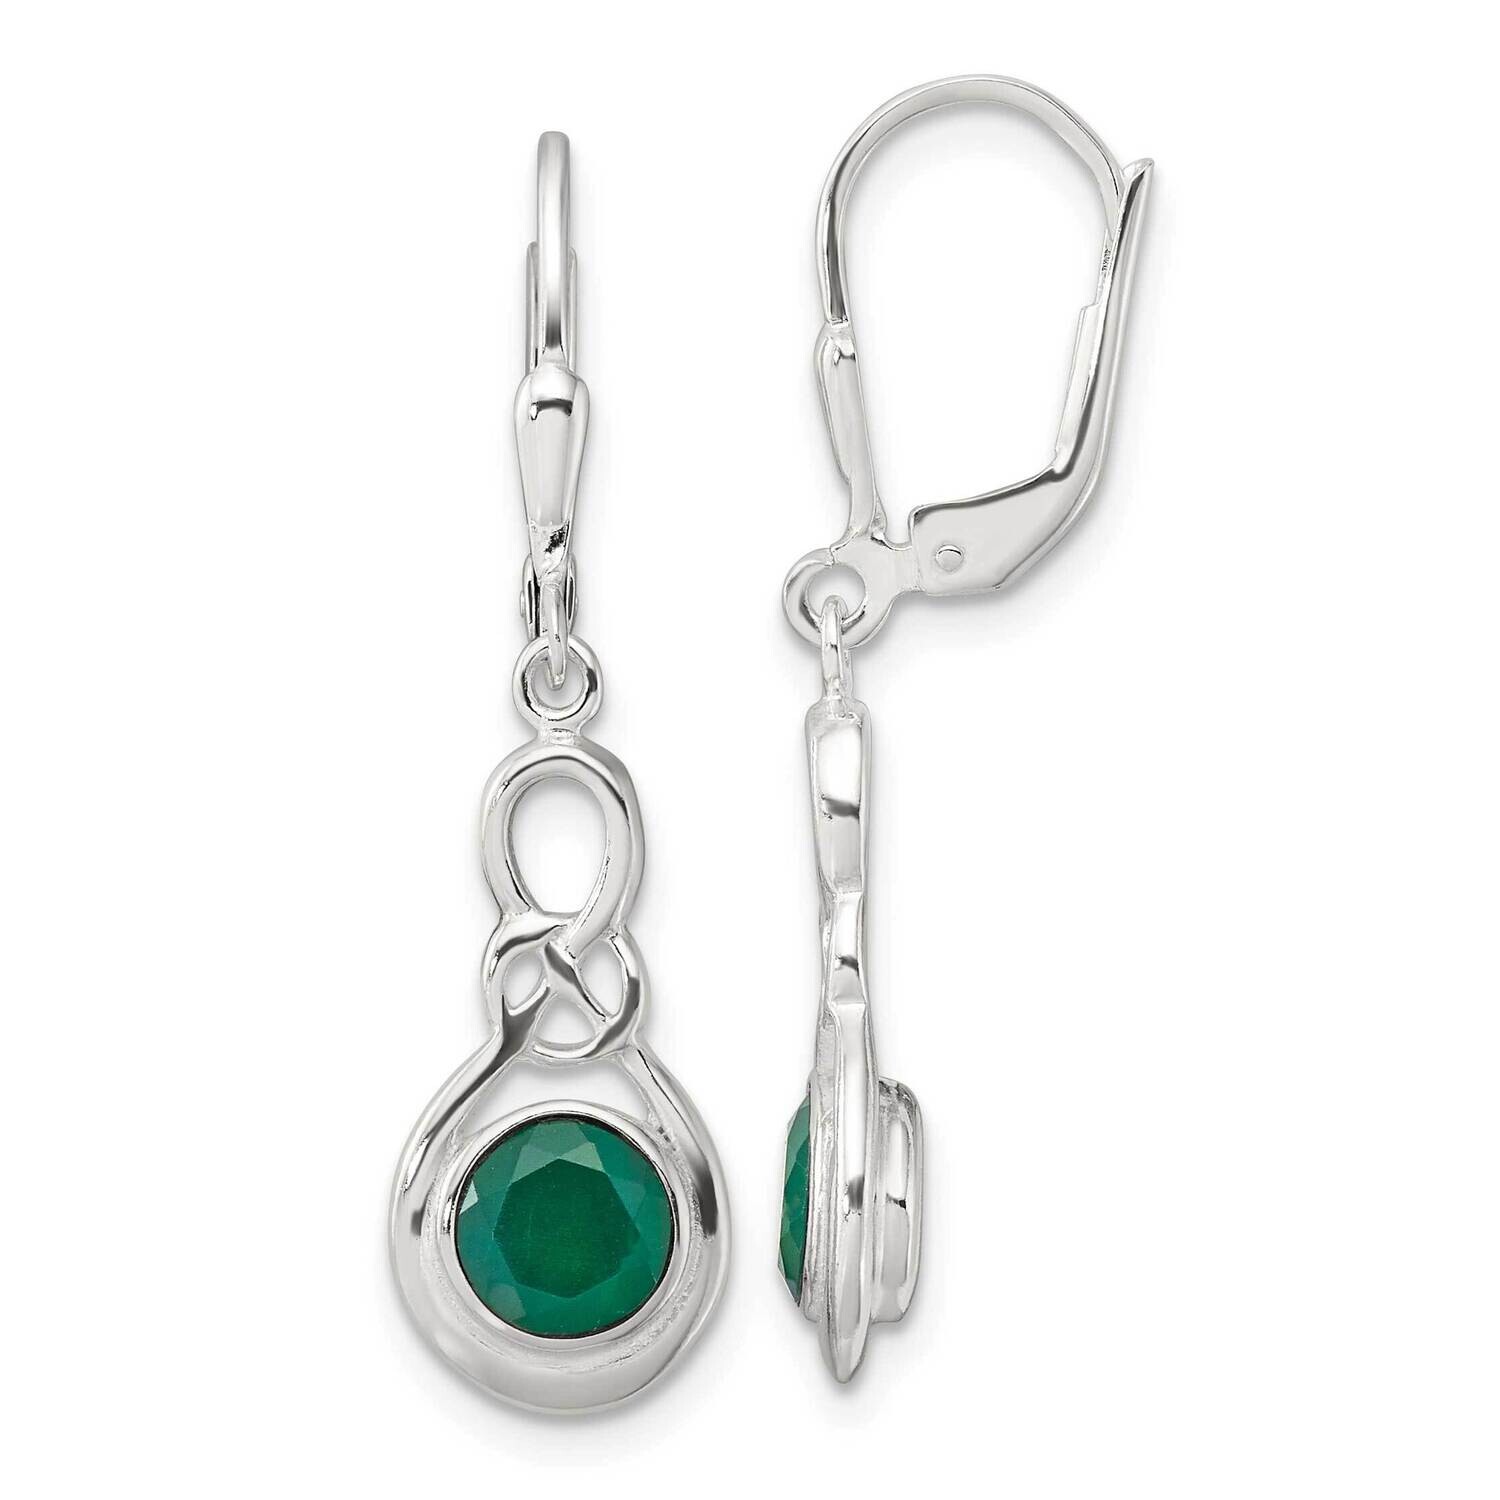 Green Onyx Knot Leverback Dangle Earrings Sterling Silver Polished QE17431